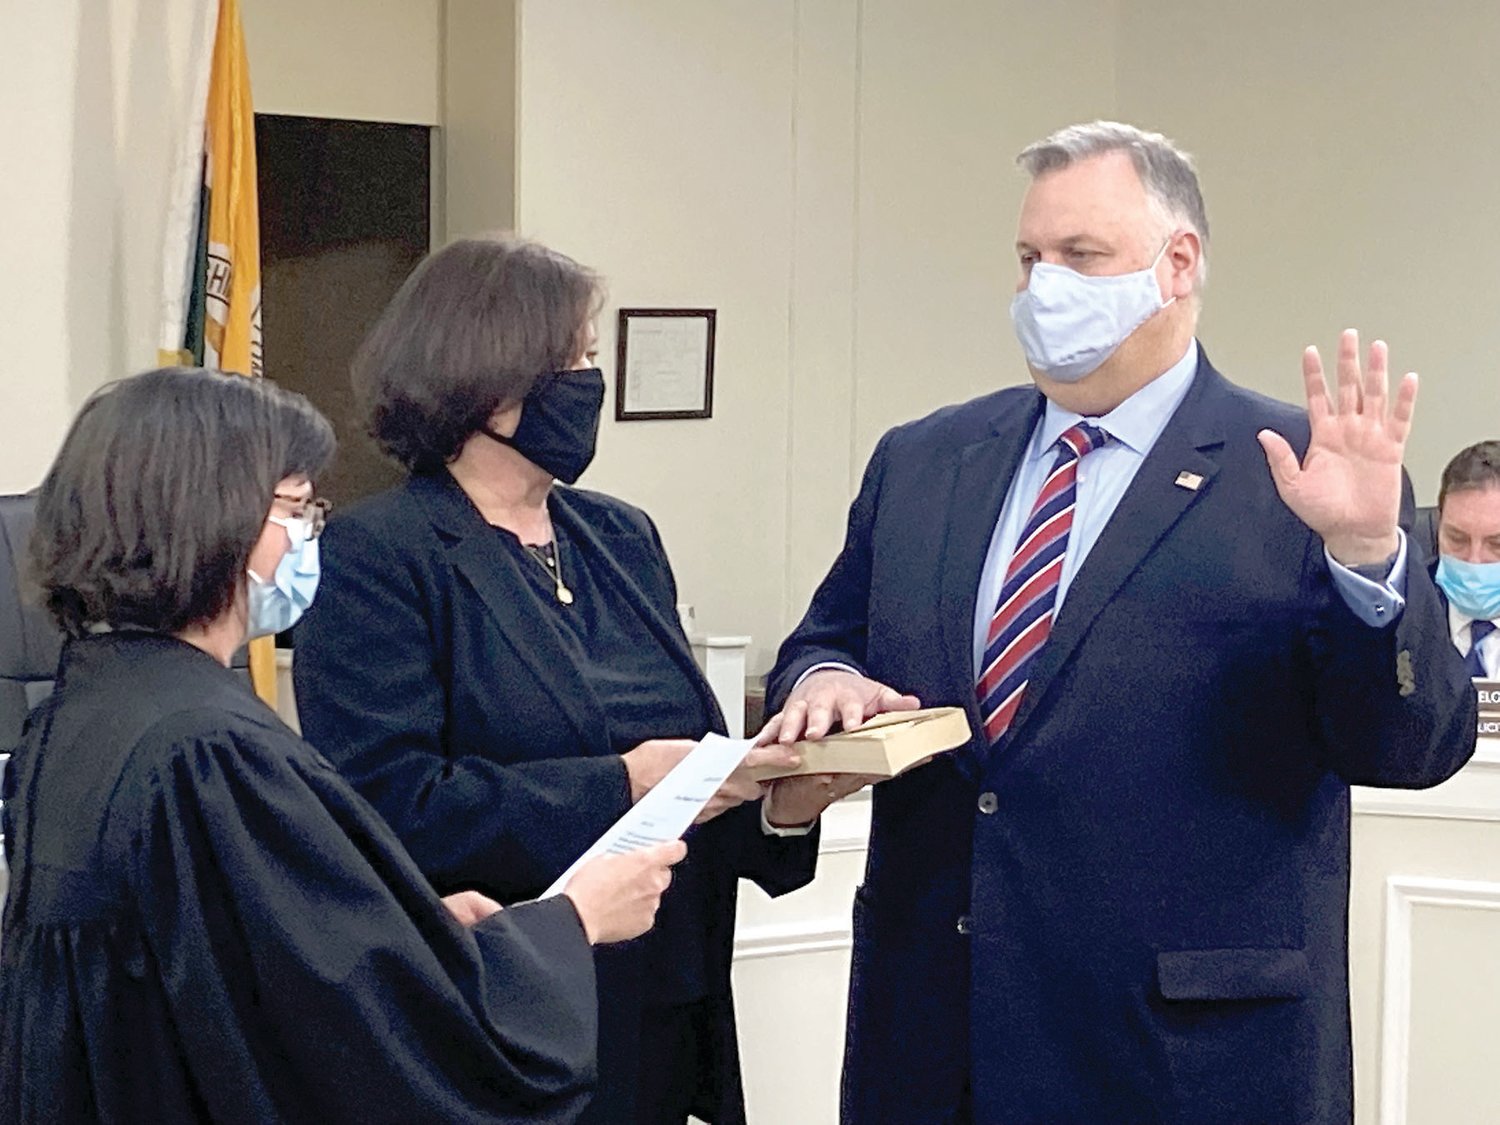 John Lewis is sworn in to a second six-year term as Lower Makefield Township supervisor at the Jan. 3 reorganization meeting as District Judge Corryn Kronnagel, left, administers the oath of office and Lewis’ wife Joanne, center, looks on.